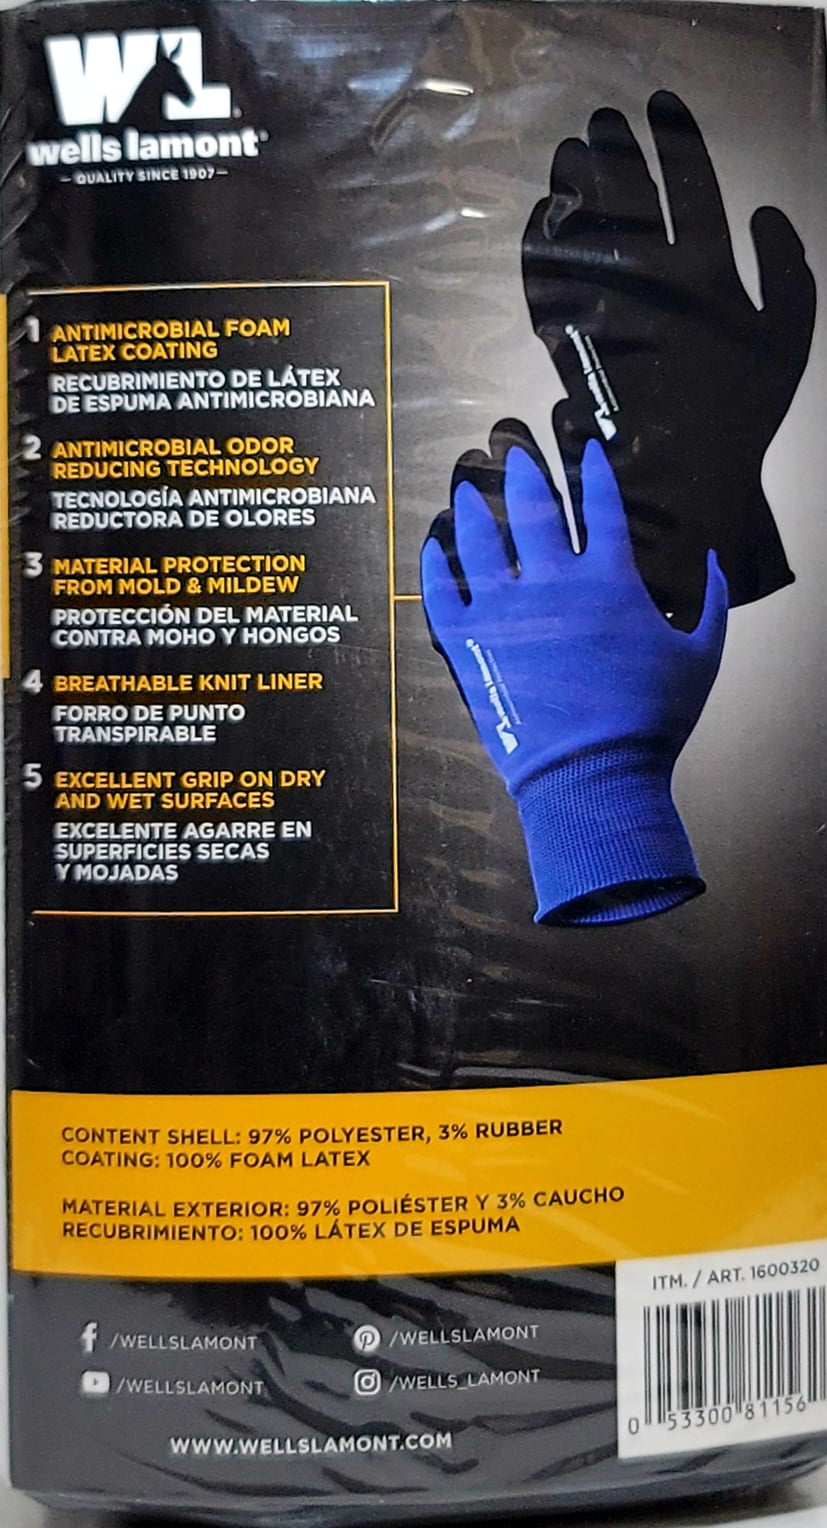 10 Pair Wells Lamont Work Gloves Latex Coating On Polyester Liner 